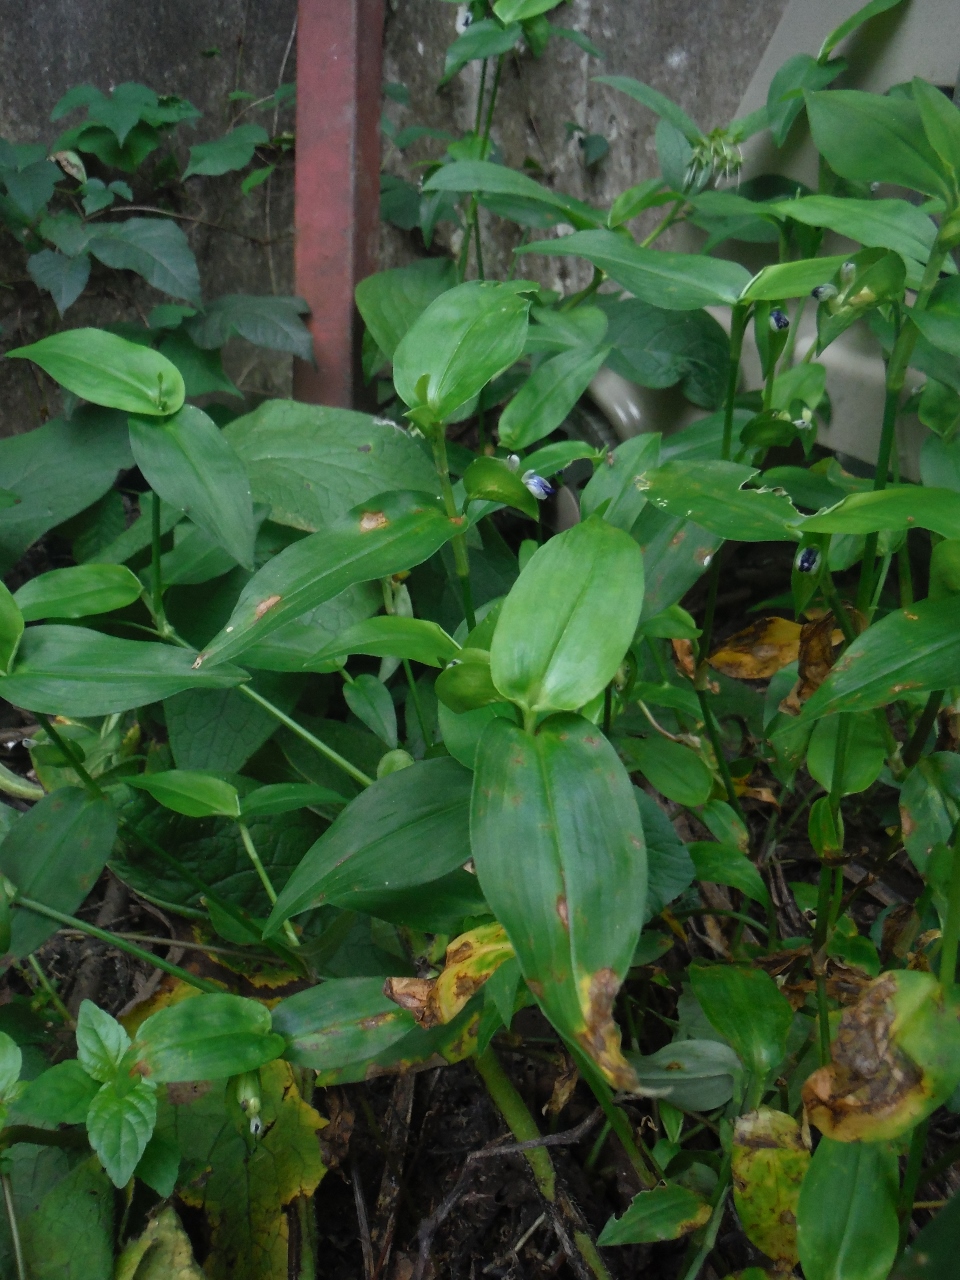 About 12 tall green stems with smooth green leaves and blue flowers